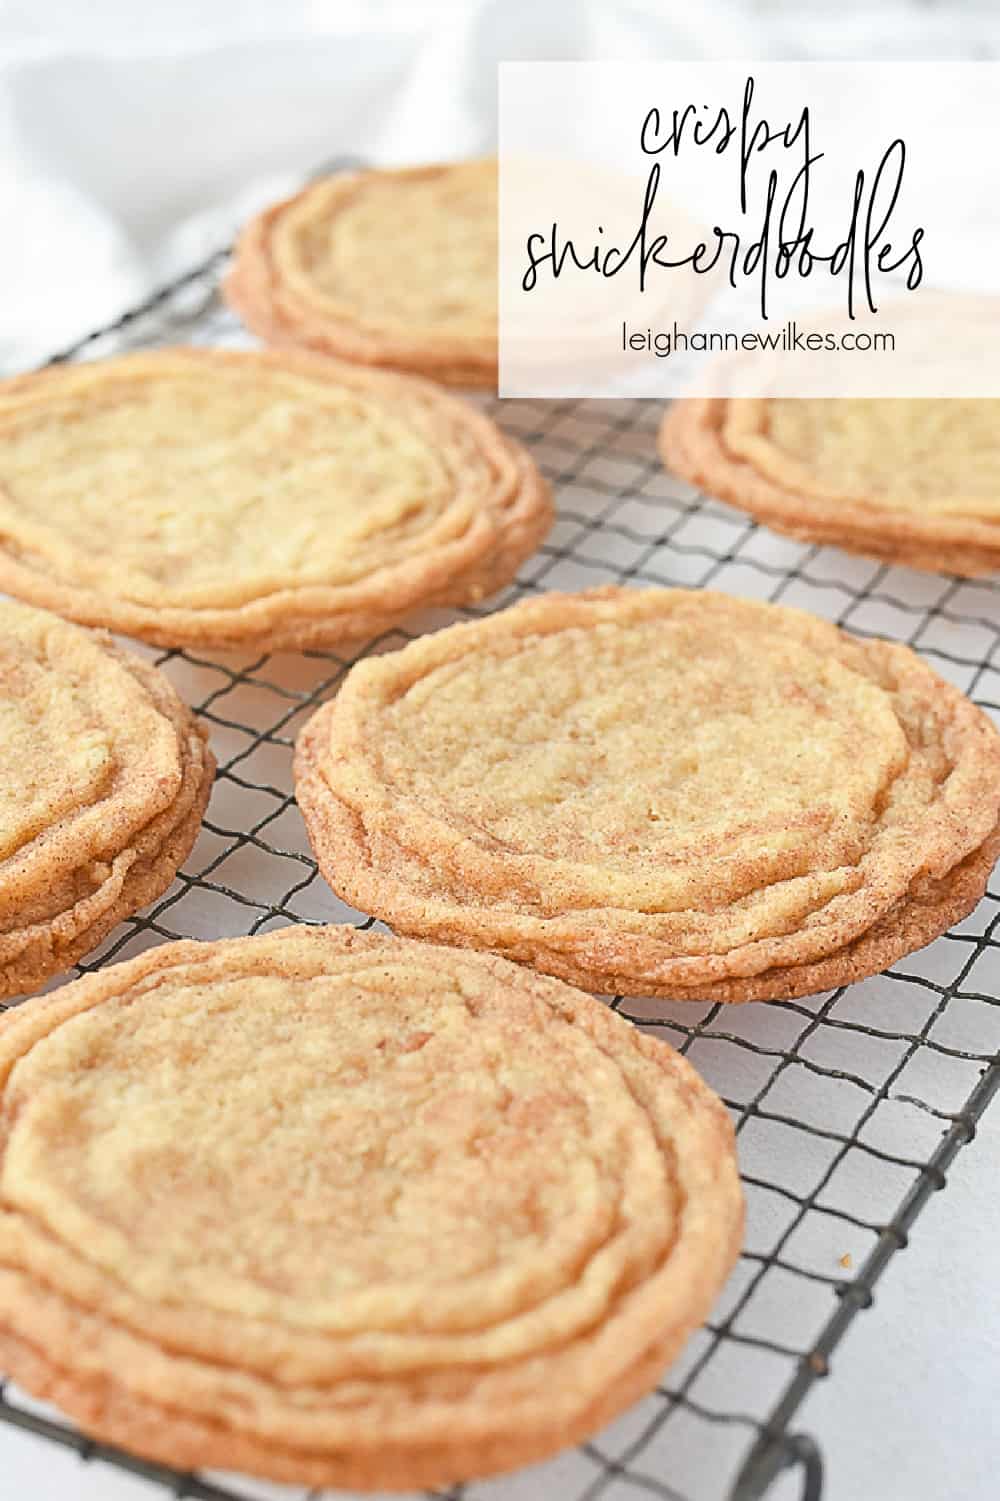 crispy snickerdoodle cookies on a cooling rack